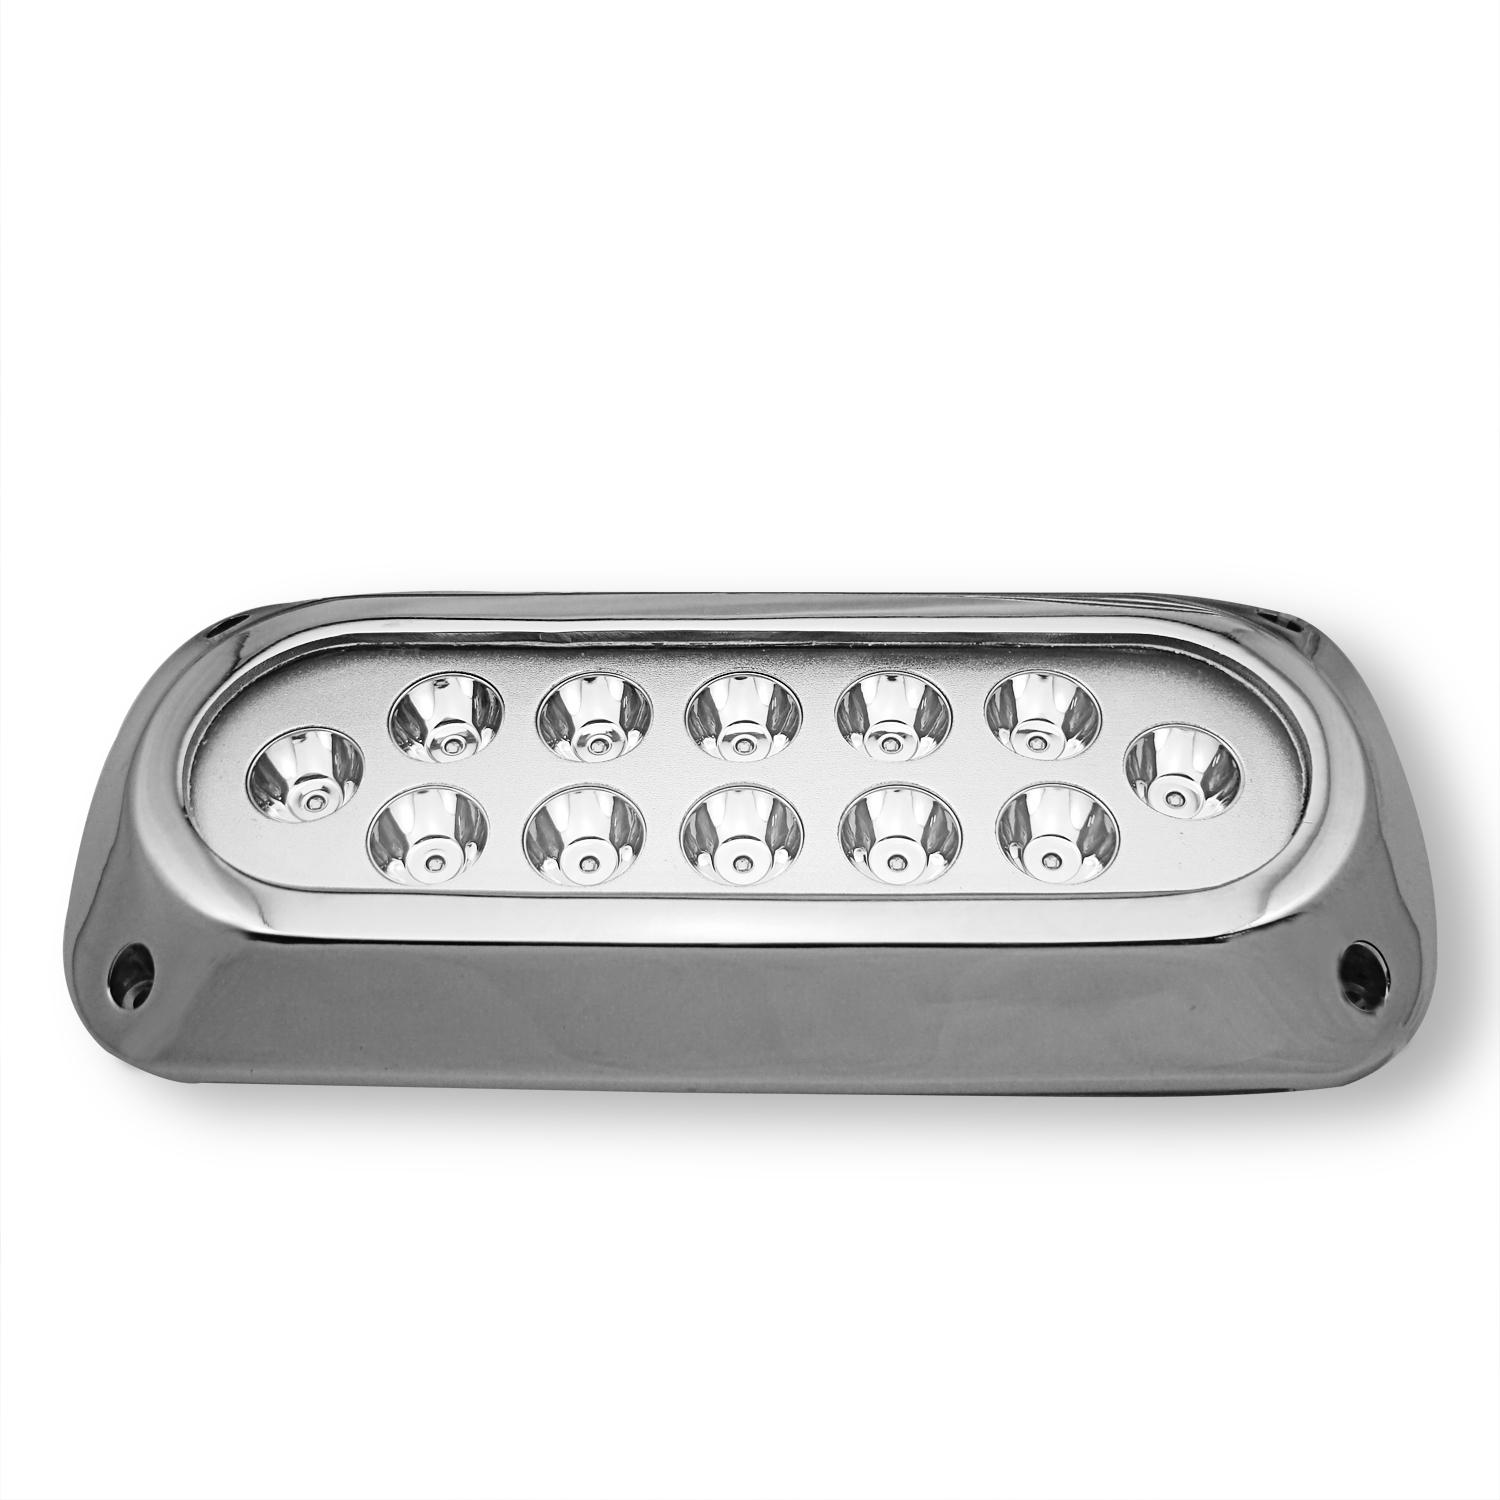 Primary image for 316 Stainless Steel LED Underwater Light 12X3W DC8-28V 220*94*22mm Marine Boat